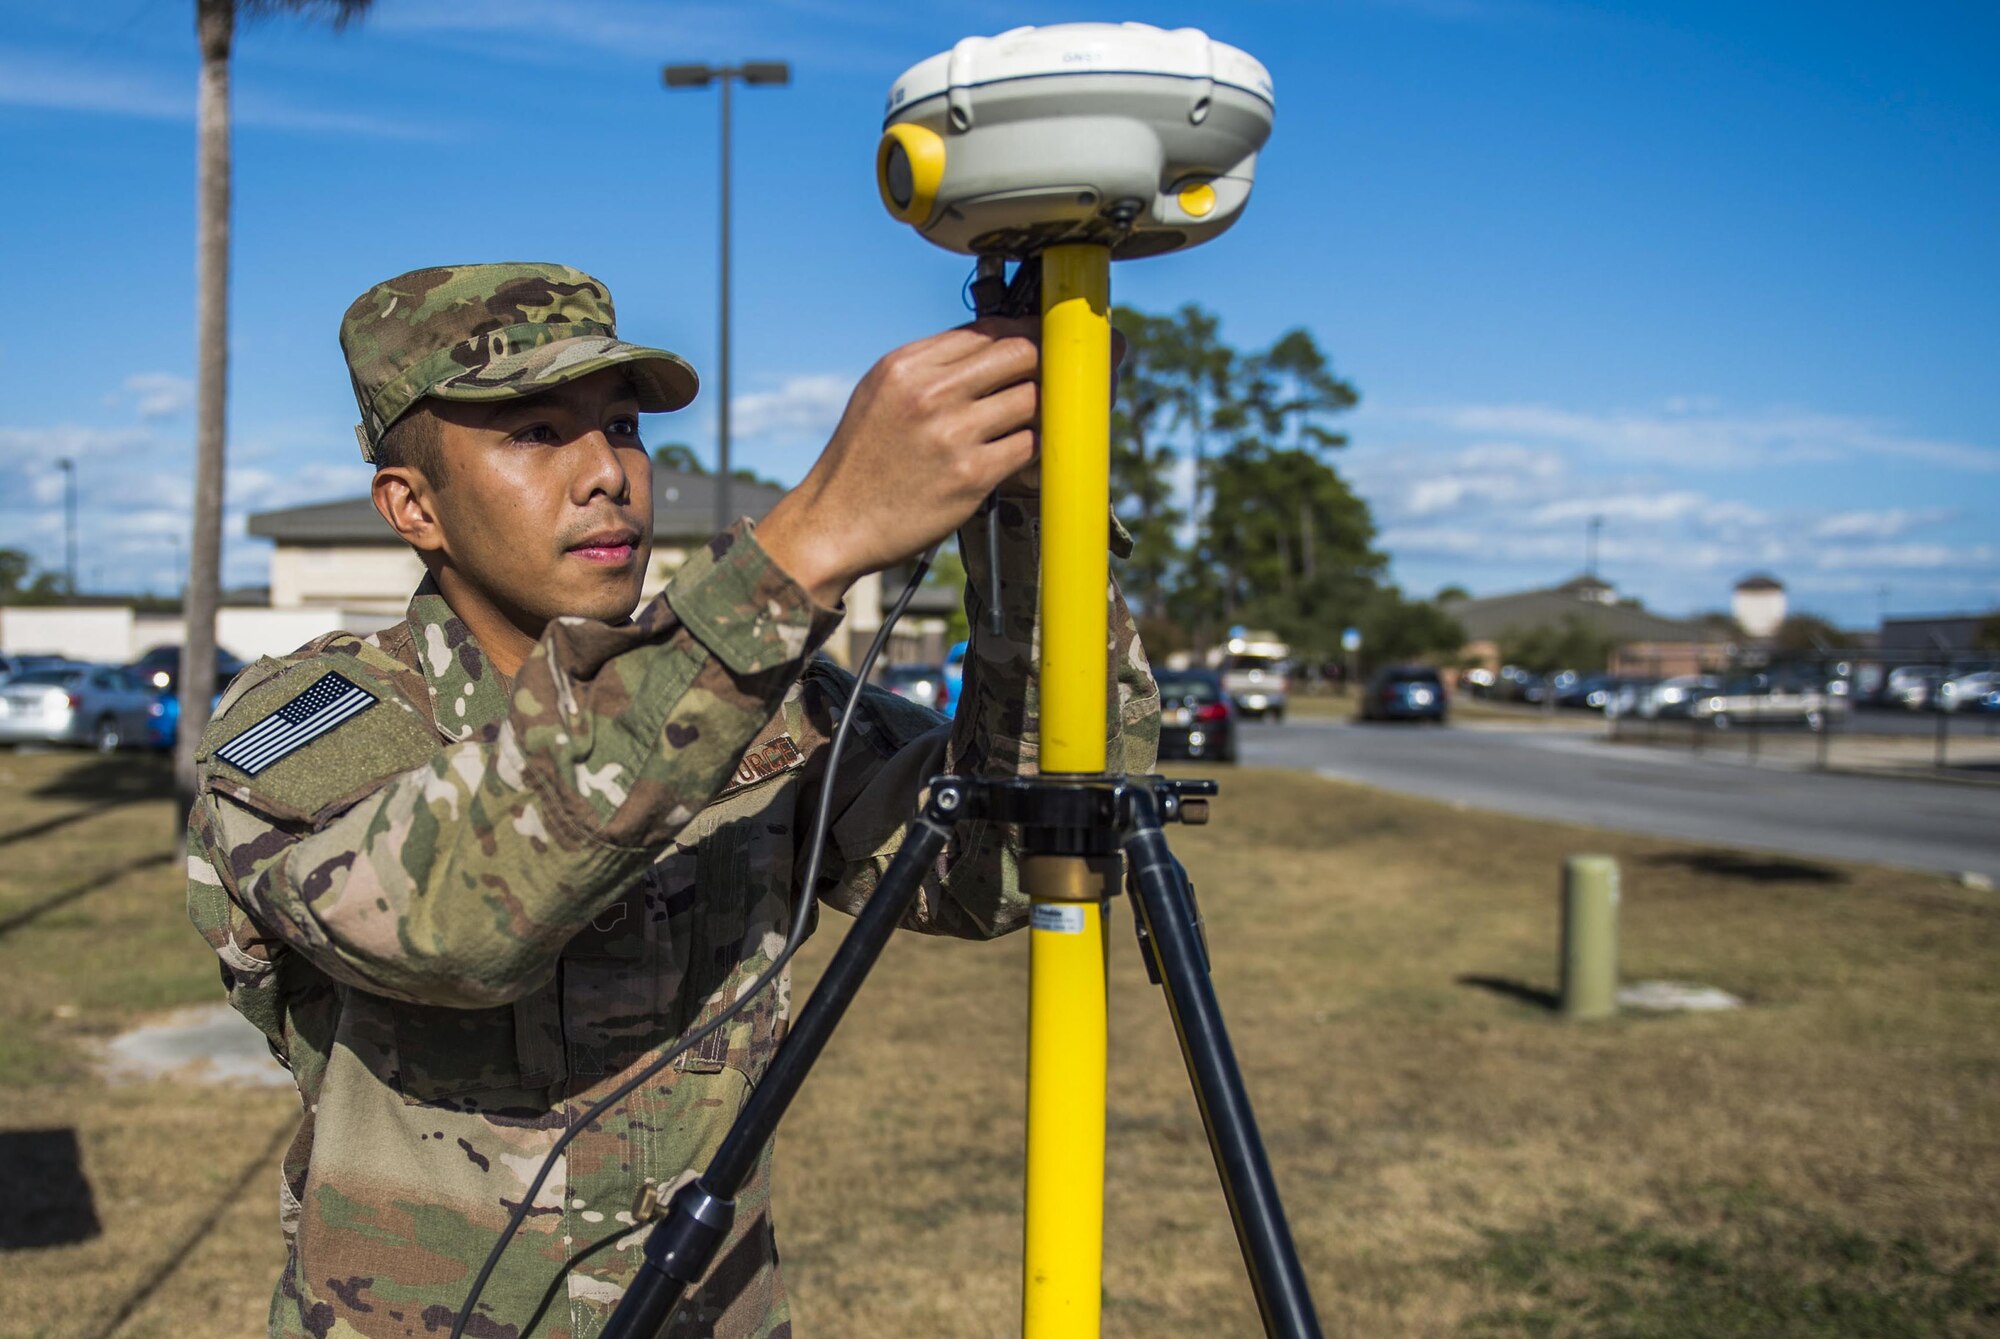 Senior Airman Giann Recapunra, an engineering specialist with the 1st Special Operations Civil Engineer Squadron, sets up a surveying GPS to verify the location and elevation of facilities on Hurlburt Field, Fla., Nov. 7, 2016. Engineering specialists use surveys to collect input data for the installation geobase database and typography to assist engineering designs for new structures.(U.S. Air Force photo by Airman 1st Class Isaac O. Guest IV)